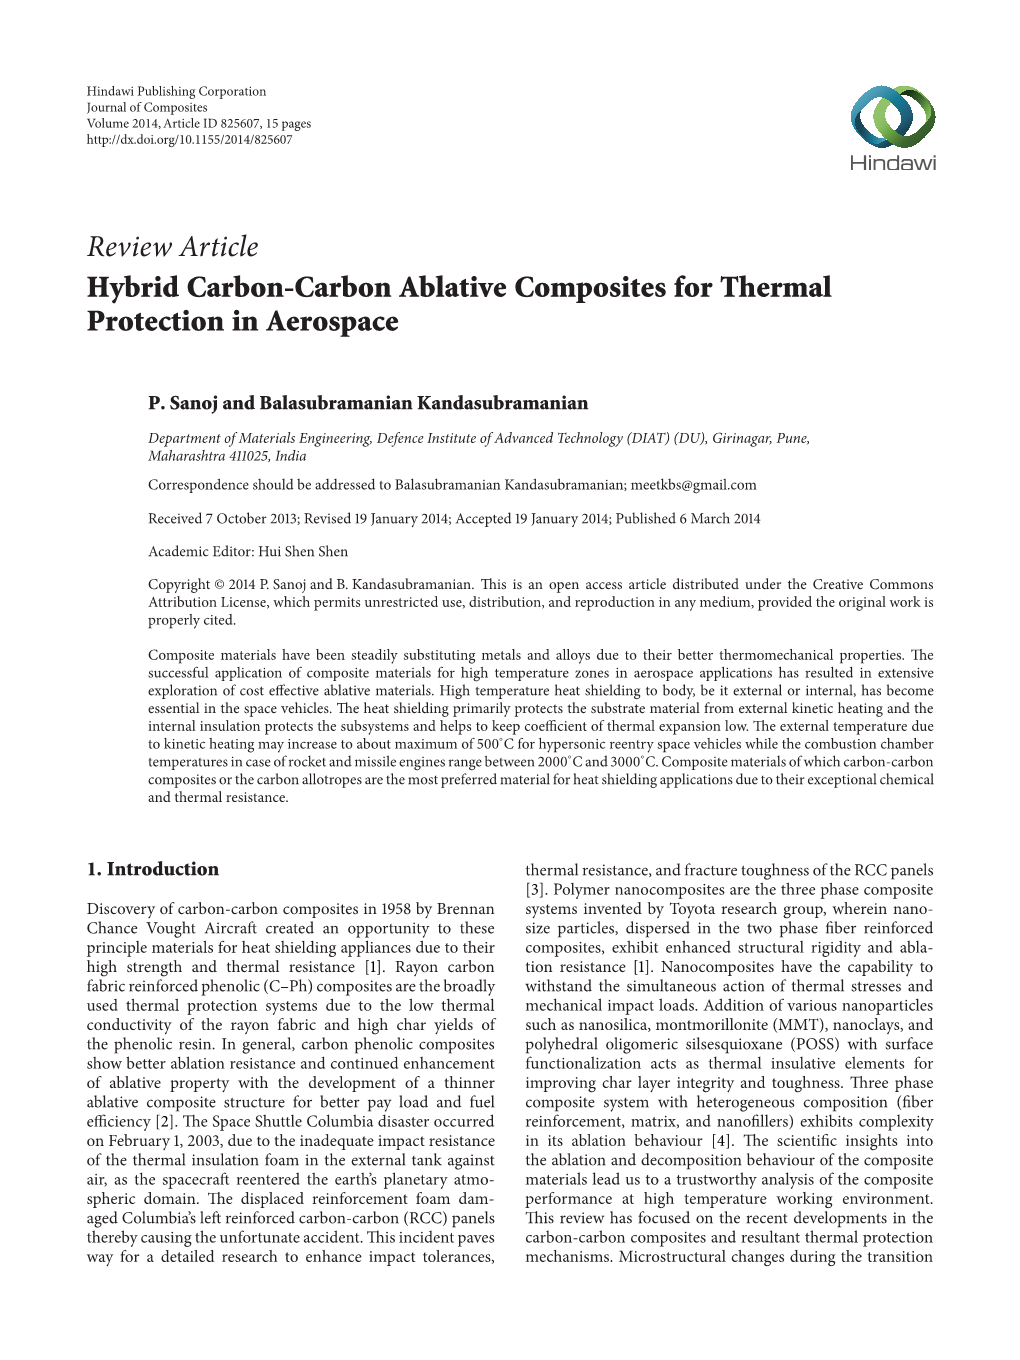 Review Article Hybrid Carbon-Carbon Ablative Composites for Thermal Protection in Aerospace